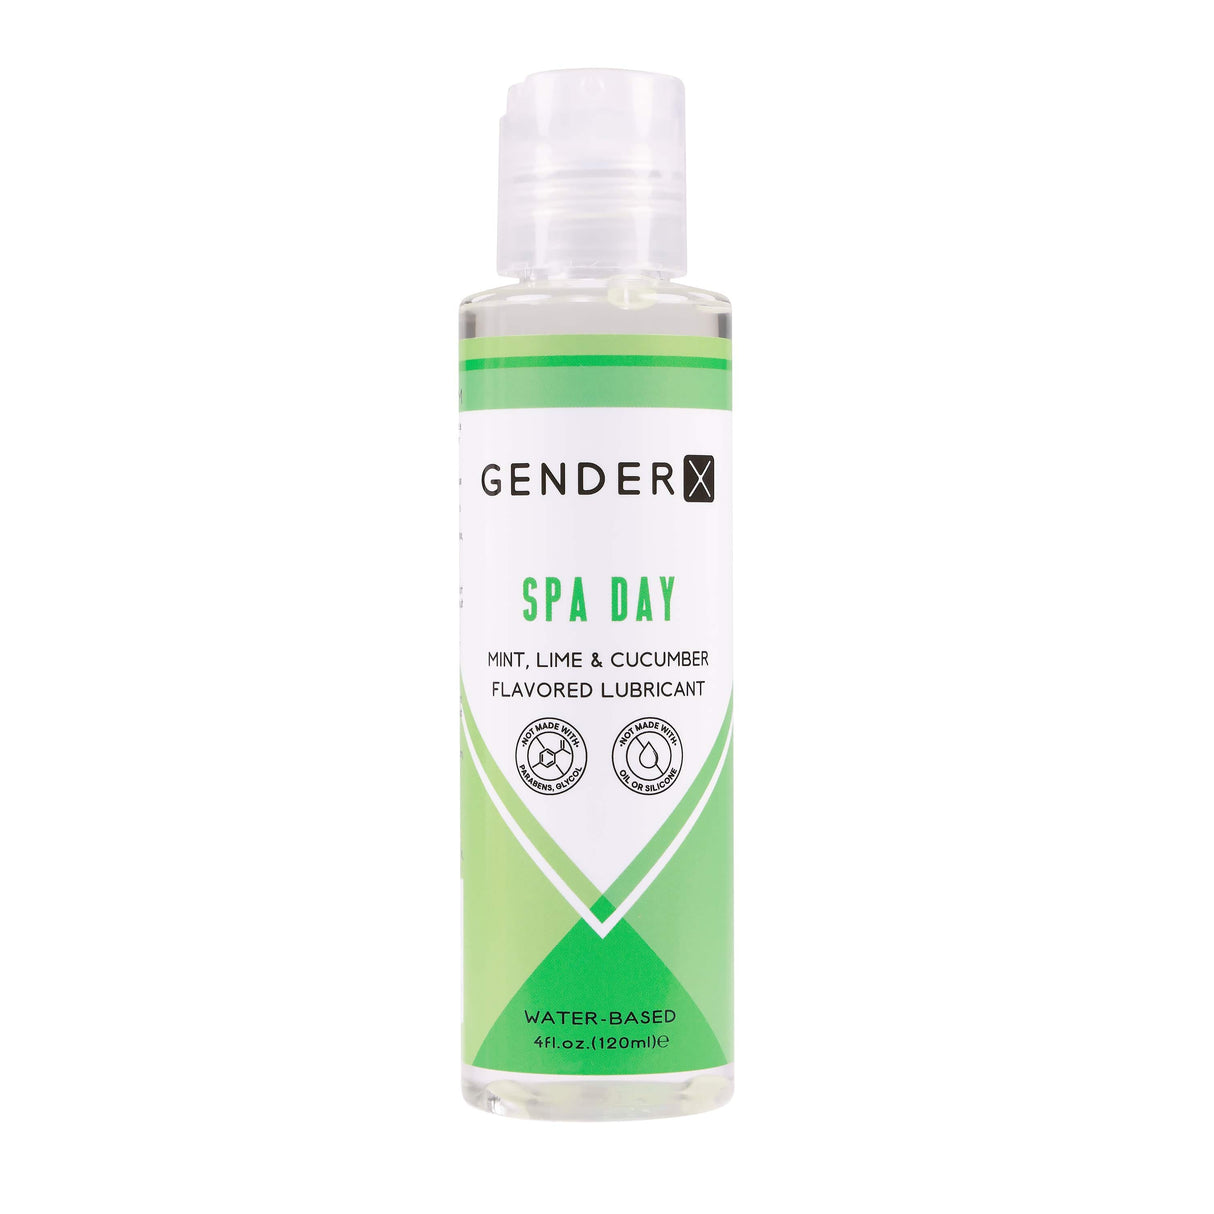 Evolved - Gender X Spa Day Mint Lime Cucumber Flavored Lube EV1107 CherryAffairs